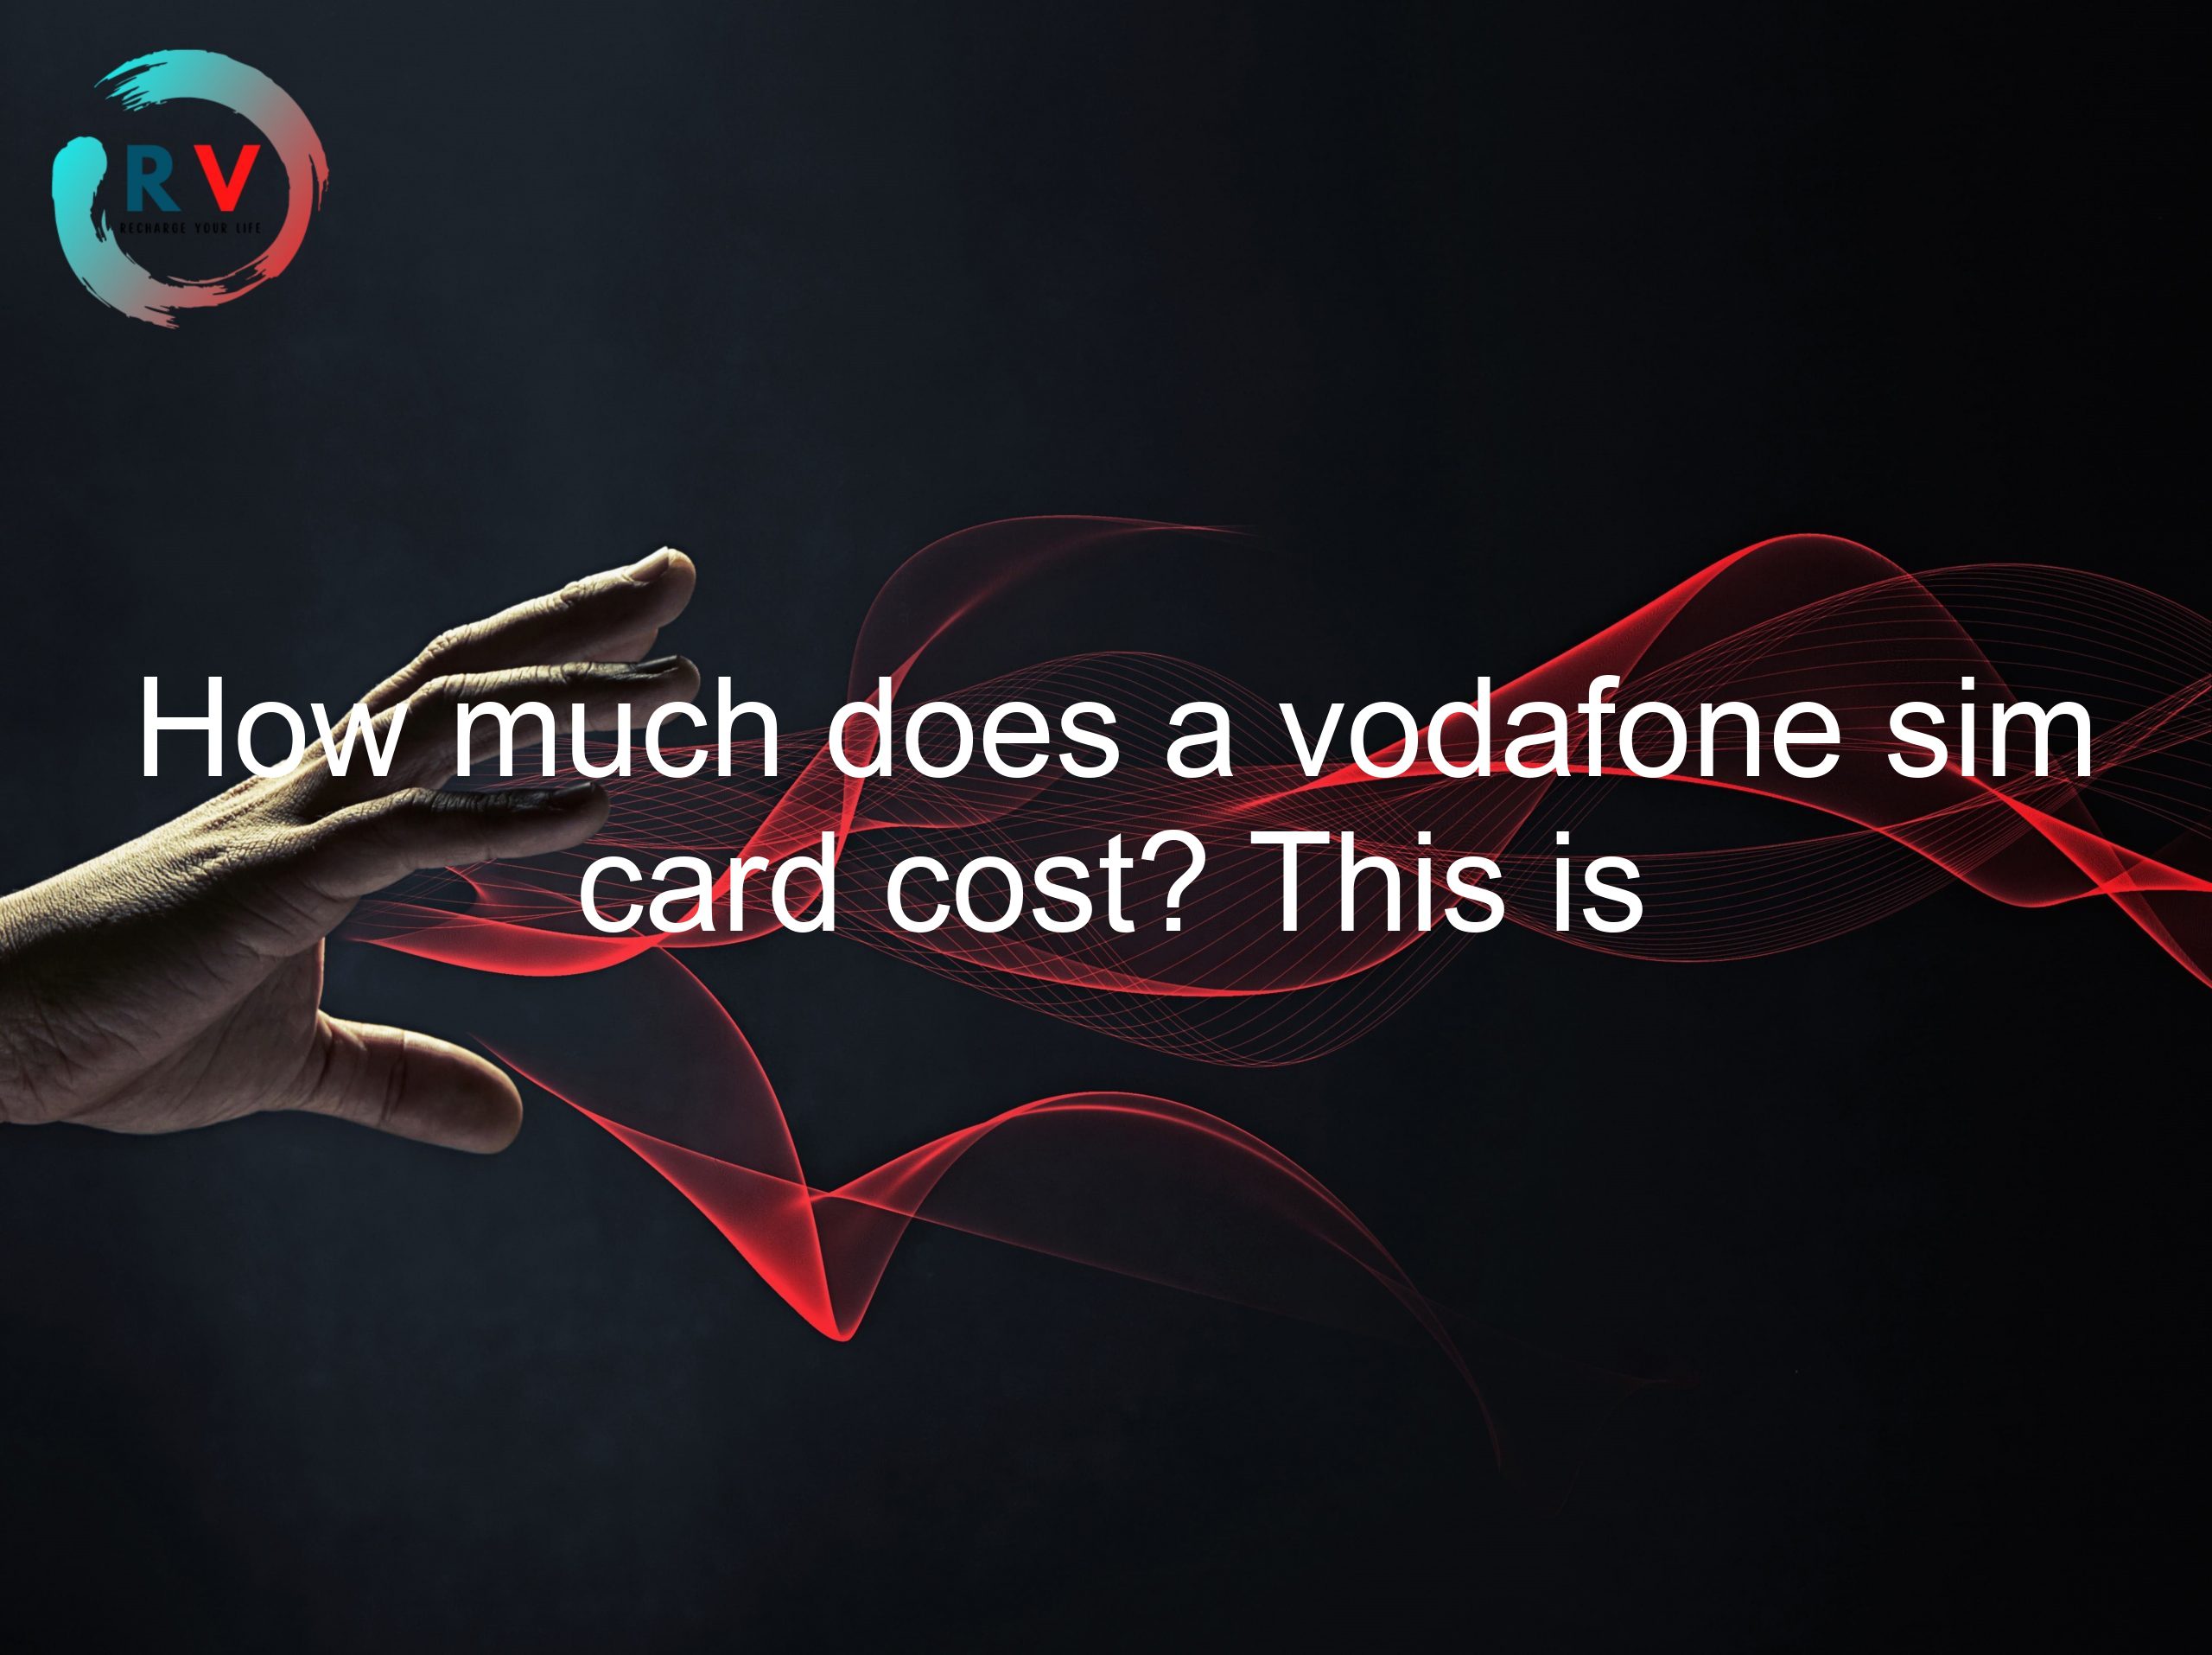 How much does a vodafone sim card cost? This is the question that we will answer in this article